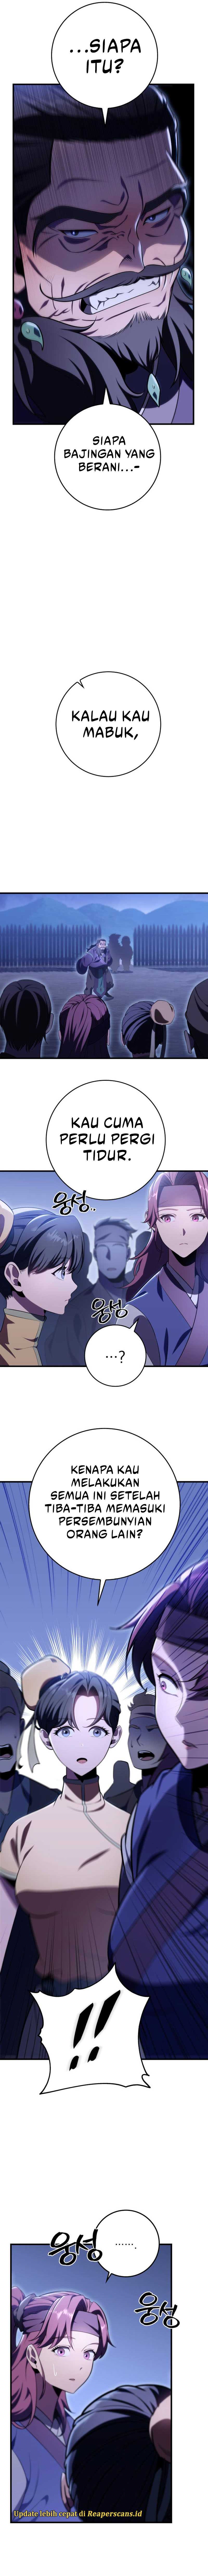 Heavenly Inquisition Sword Chapter 28 13